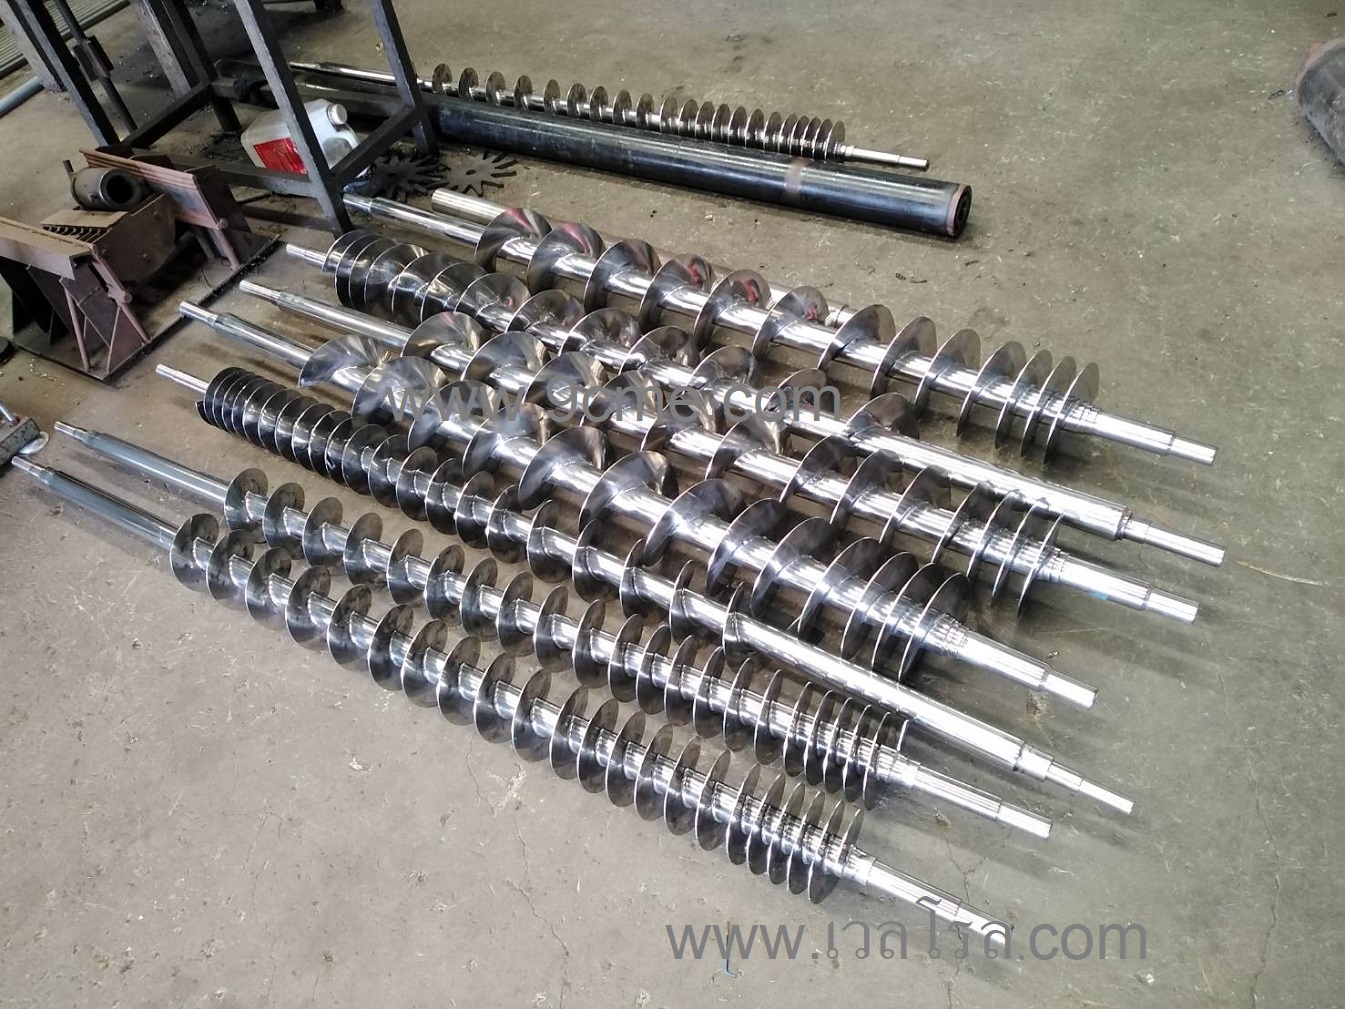 Spare parts for screw feeder